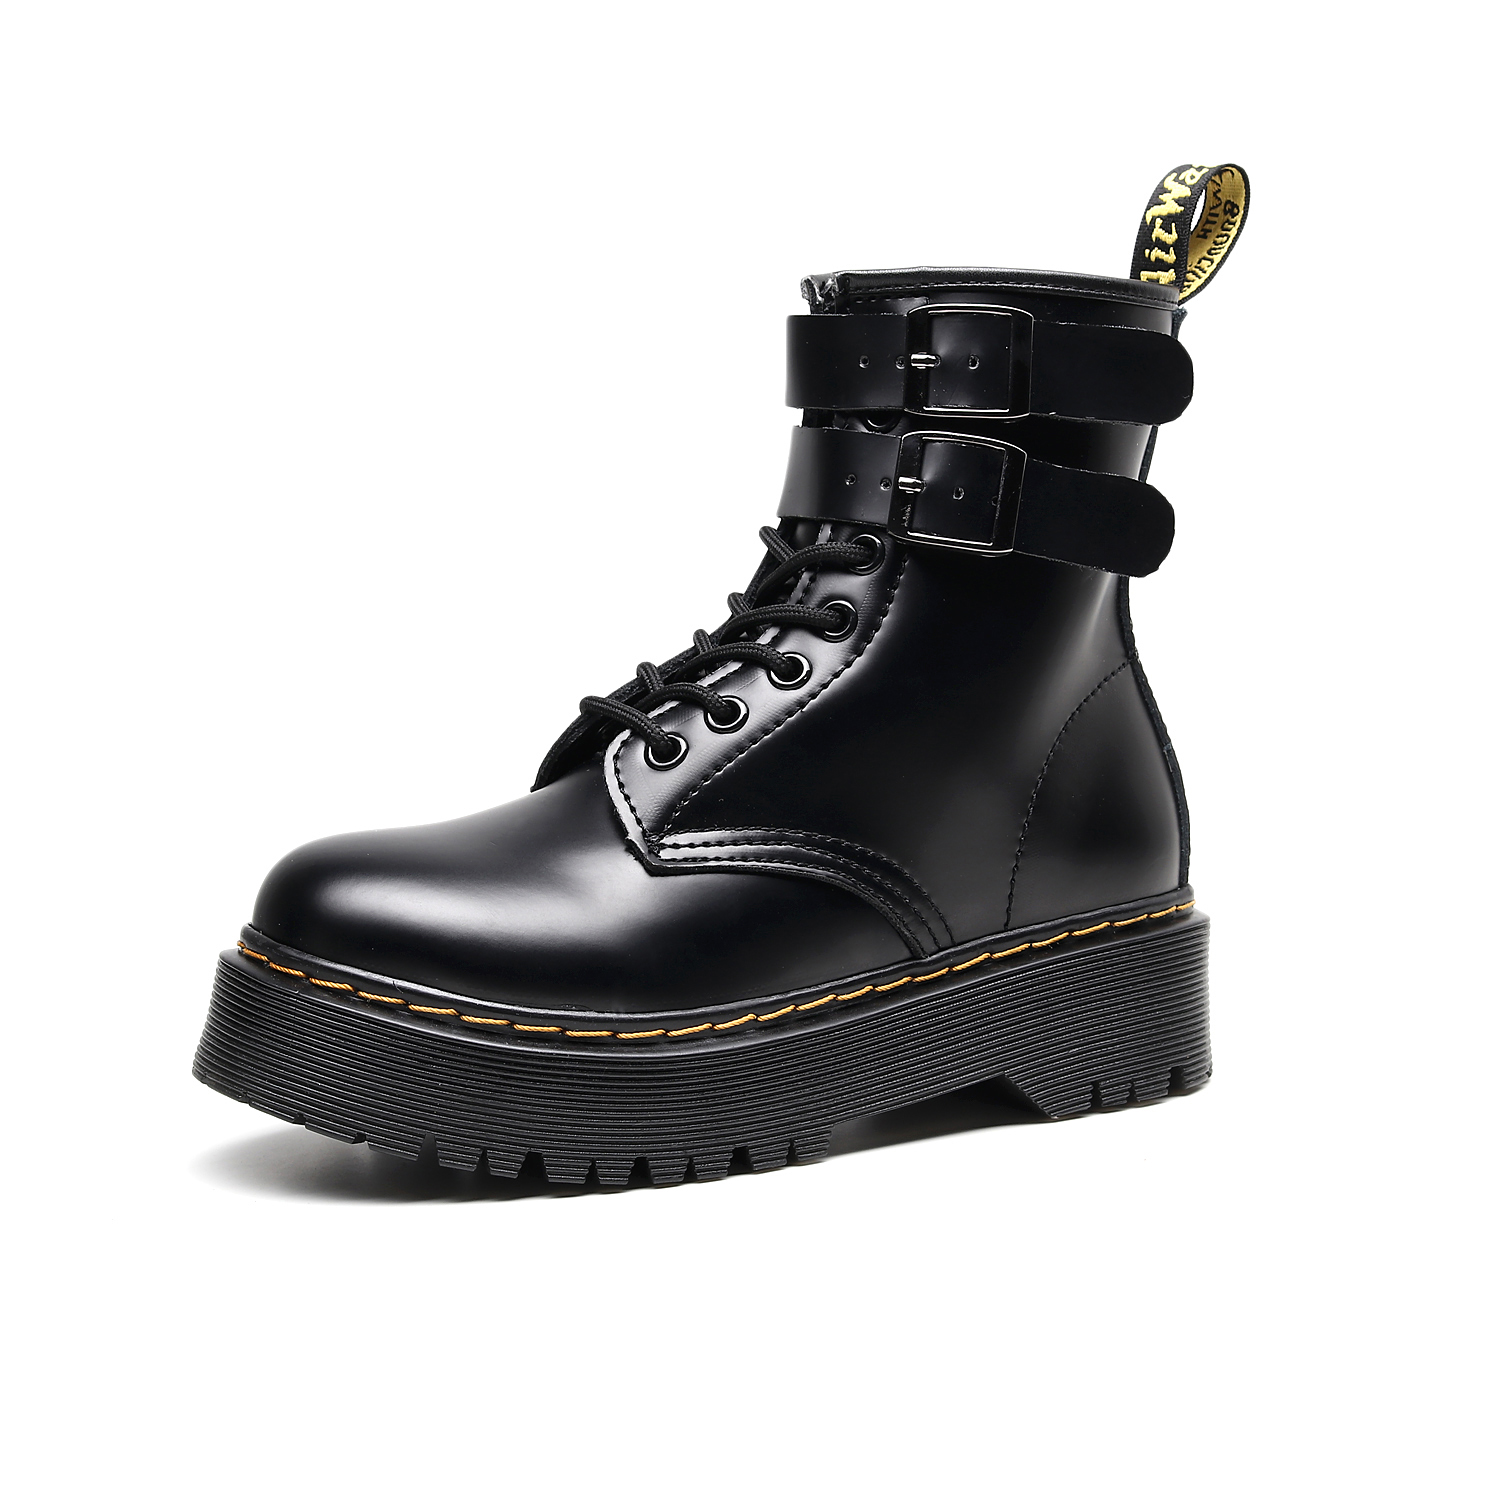 New arrival black women fashion casual leather shoes martin boots...